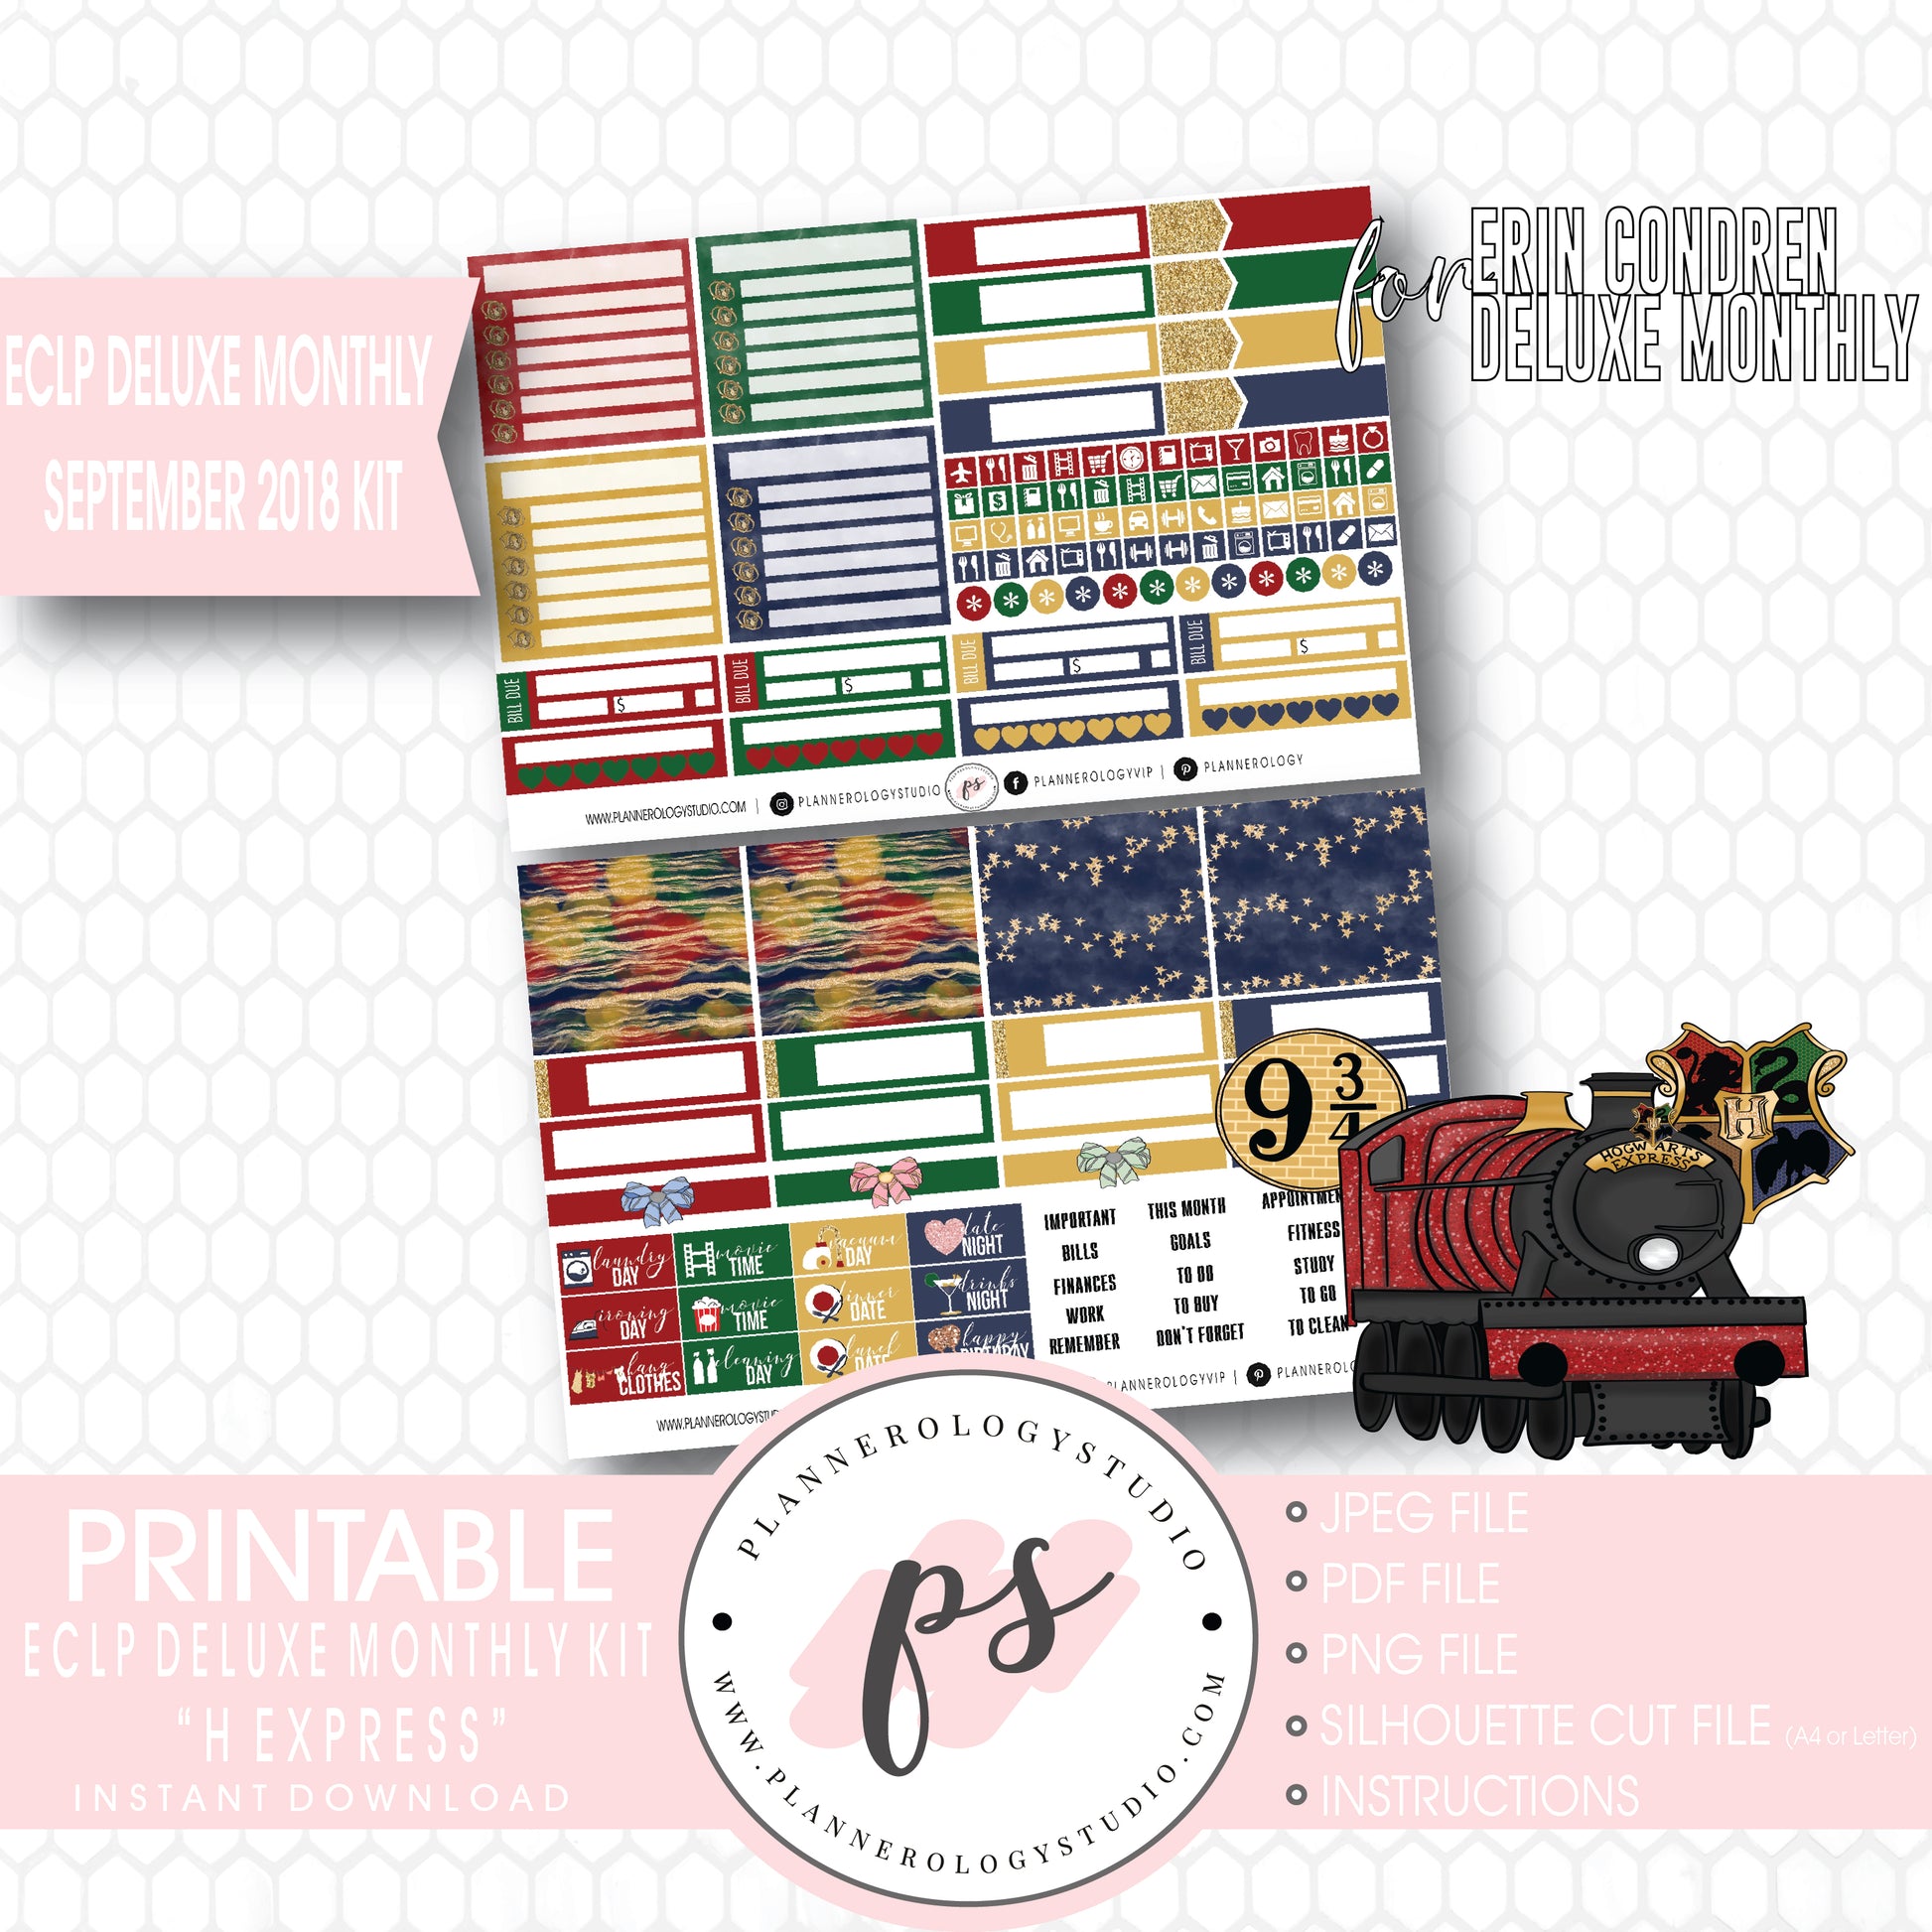 H Express (Harry Potter) September 2018 Monthly View Kit Digital Printable Planner Stickers (for use with Erin Condren Deluxe Monthly Planner) - Plannerologystudio